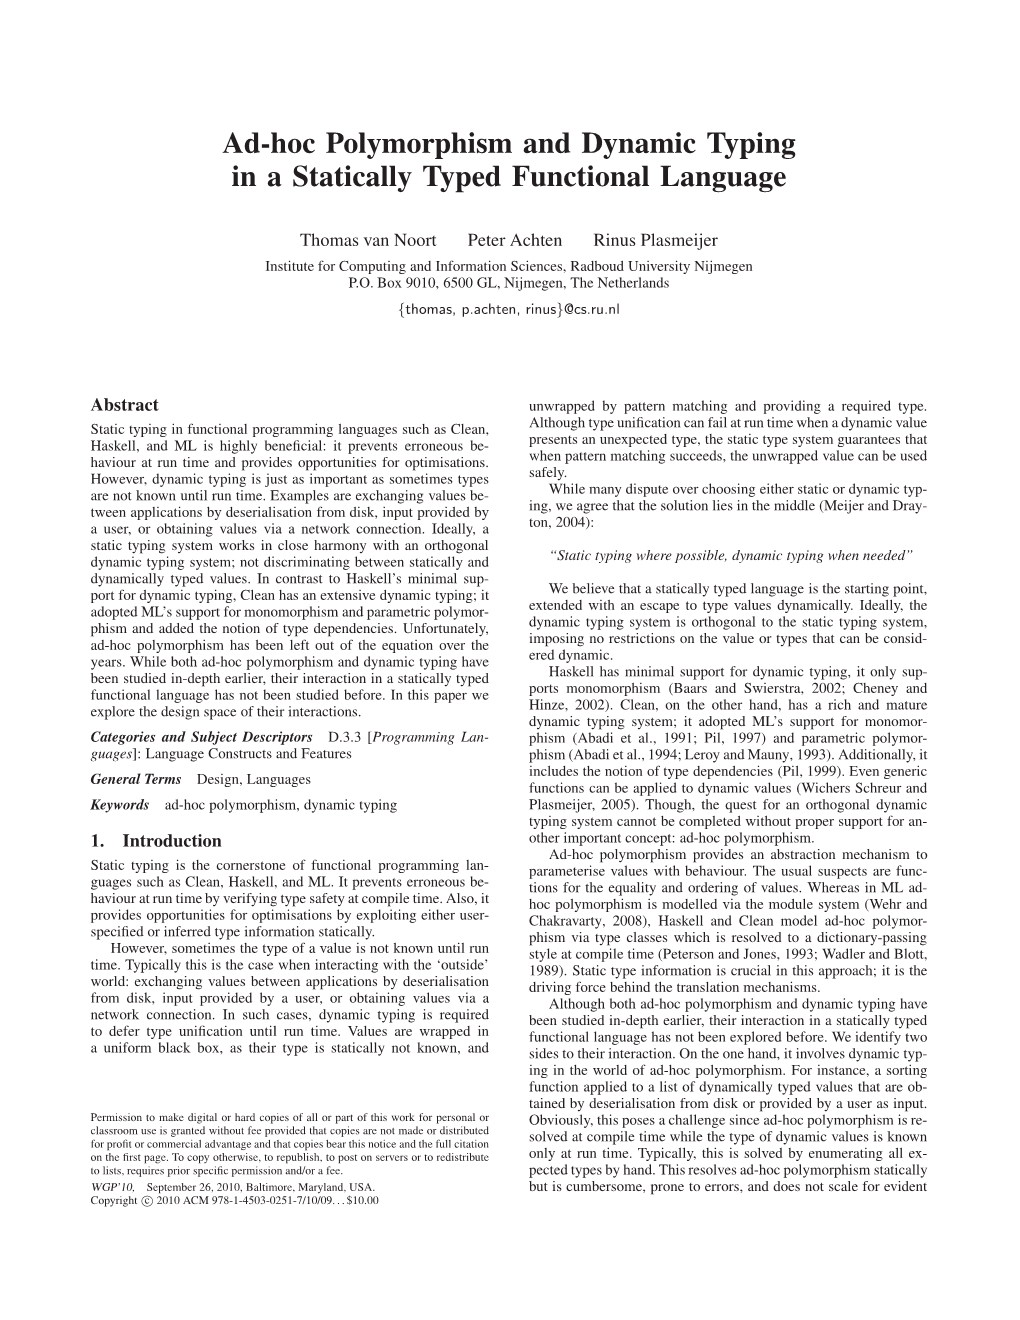 Ad-Hoc Polymorphism and Dynamic Typing in a Statically Typed Functional Language